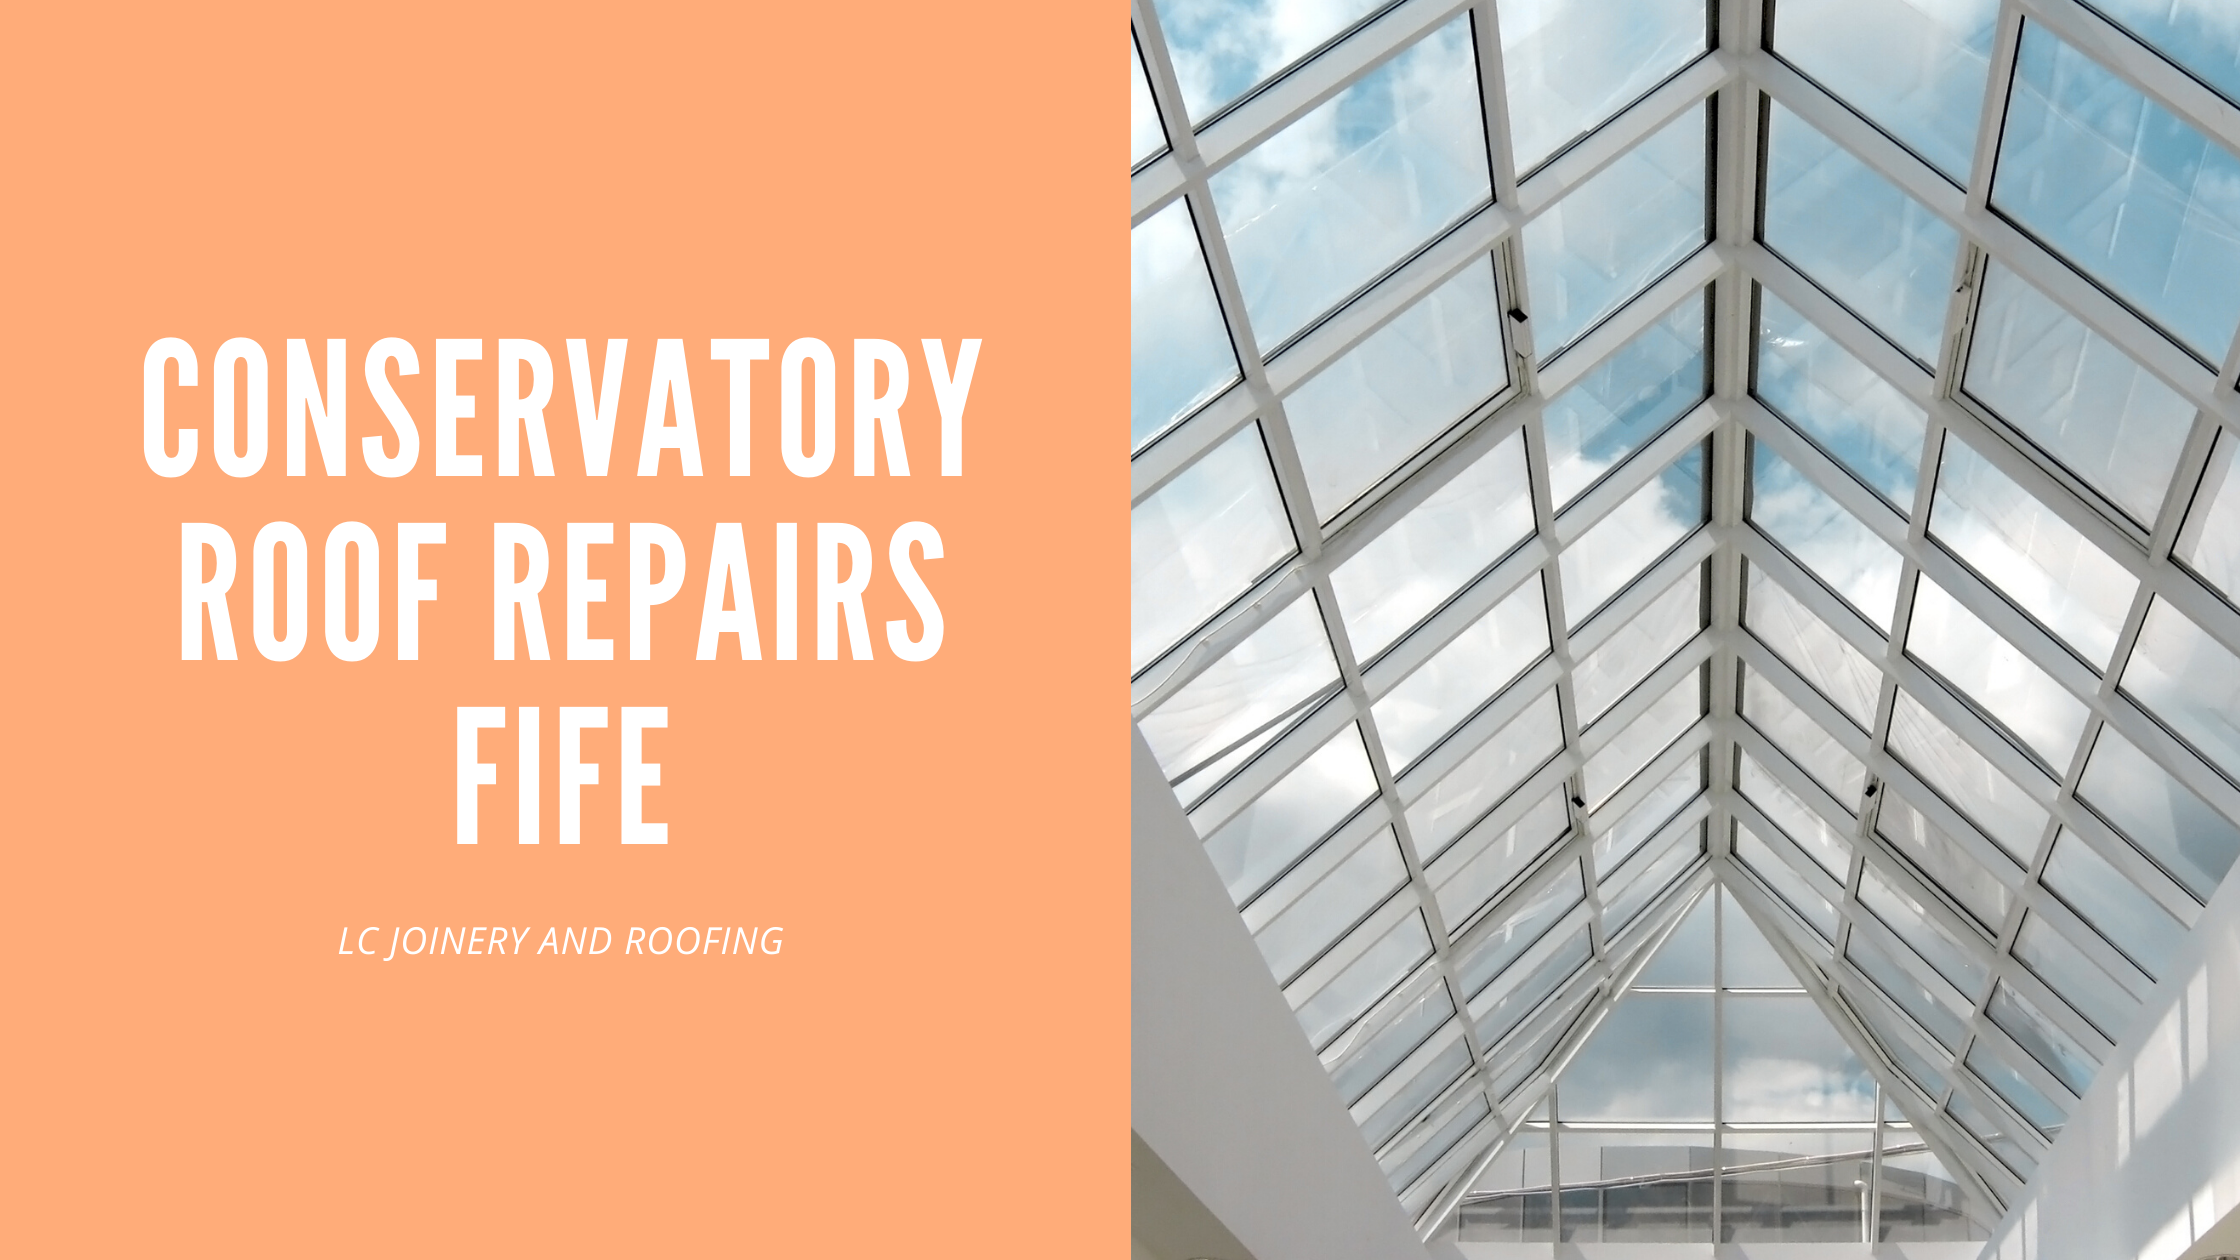 Conservatory Roof Repairs Fife